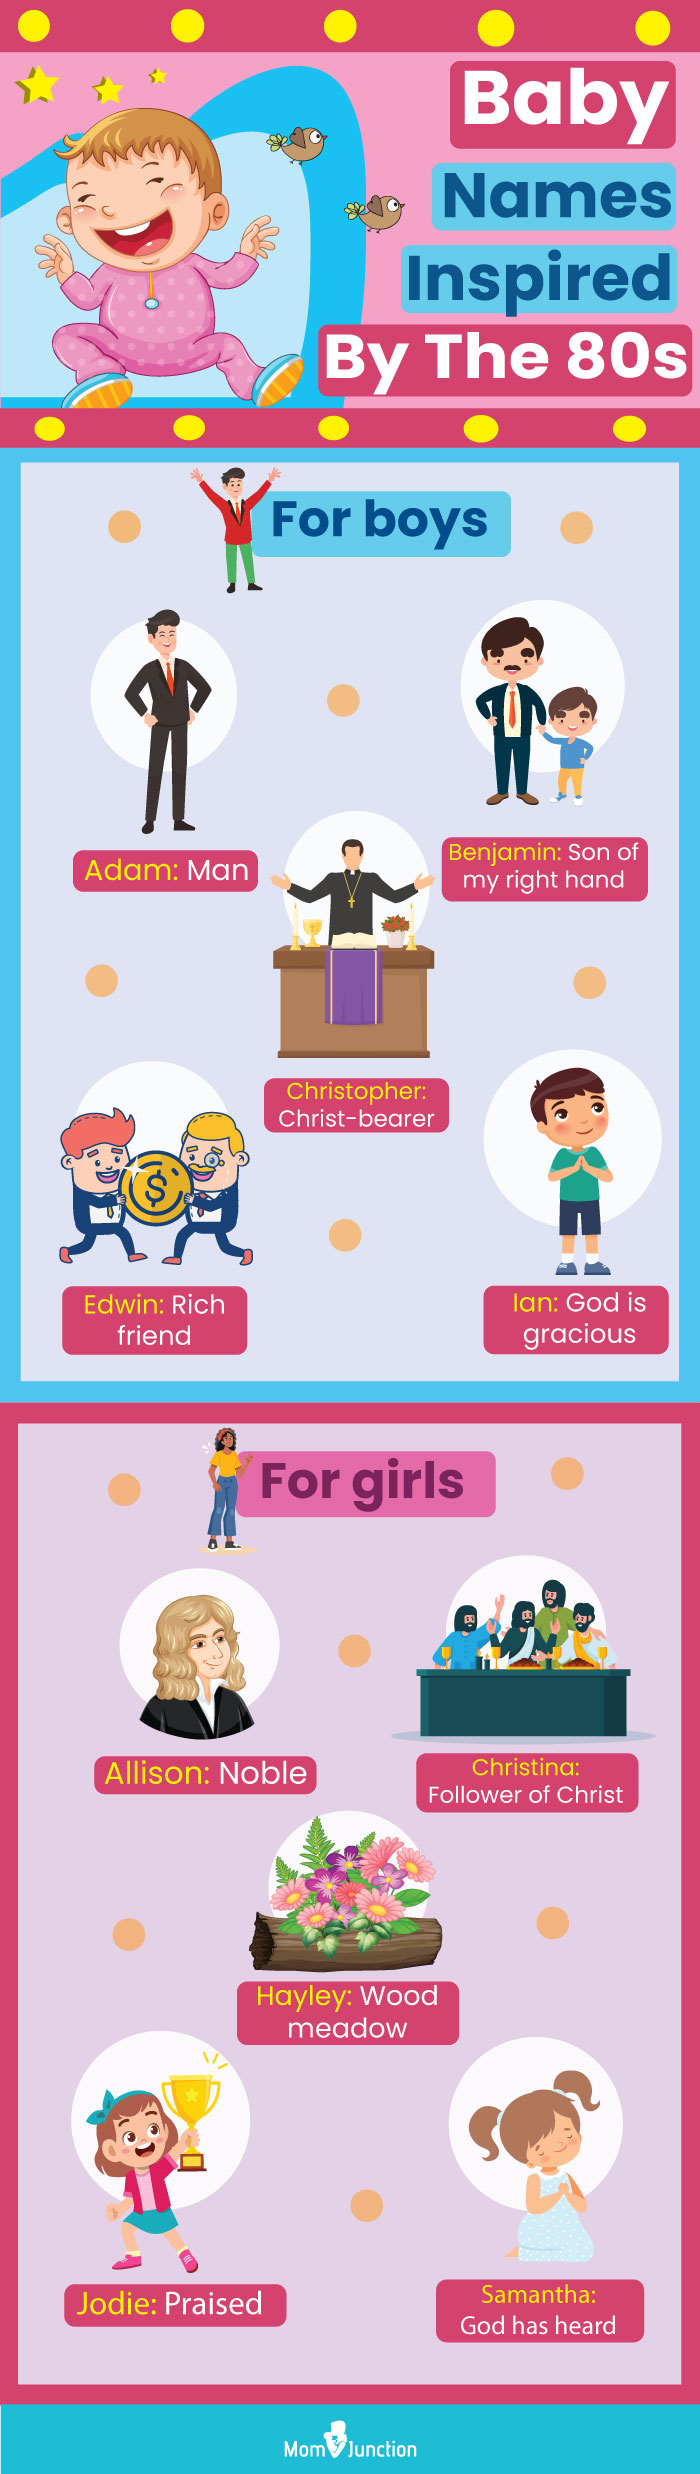 baby names inspired by the 80s (infographic)